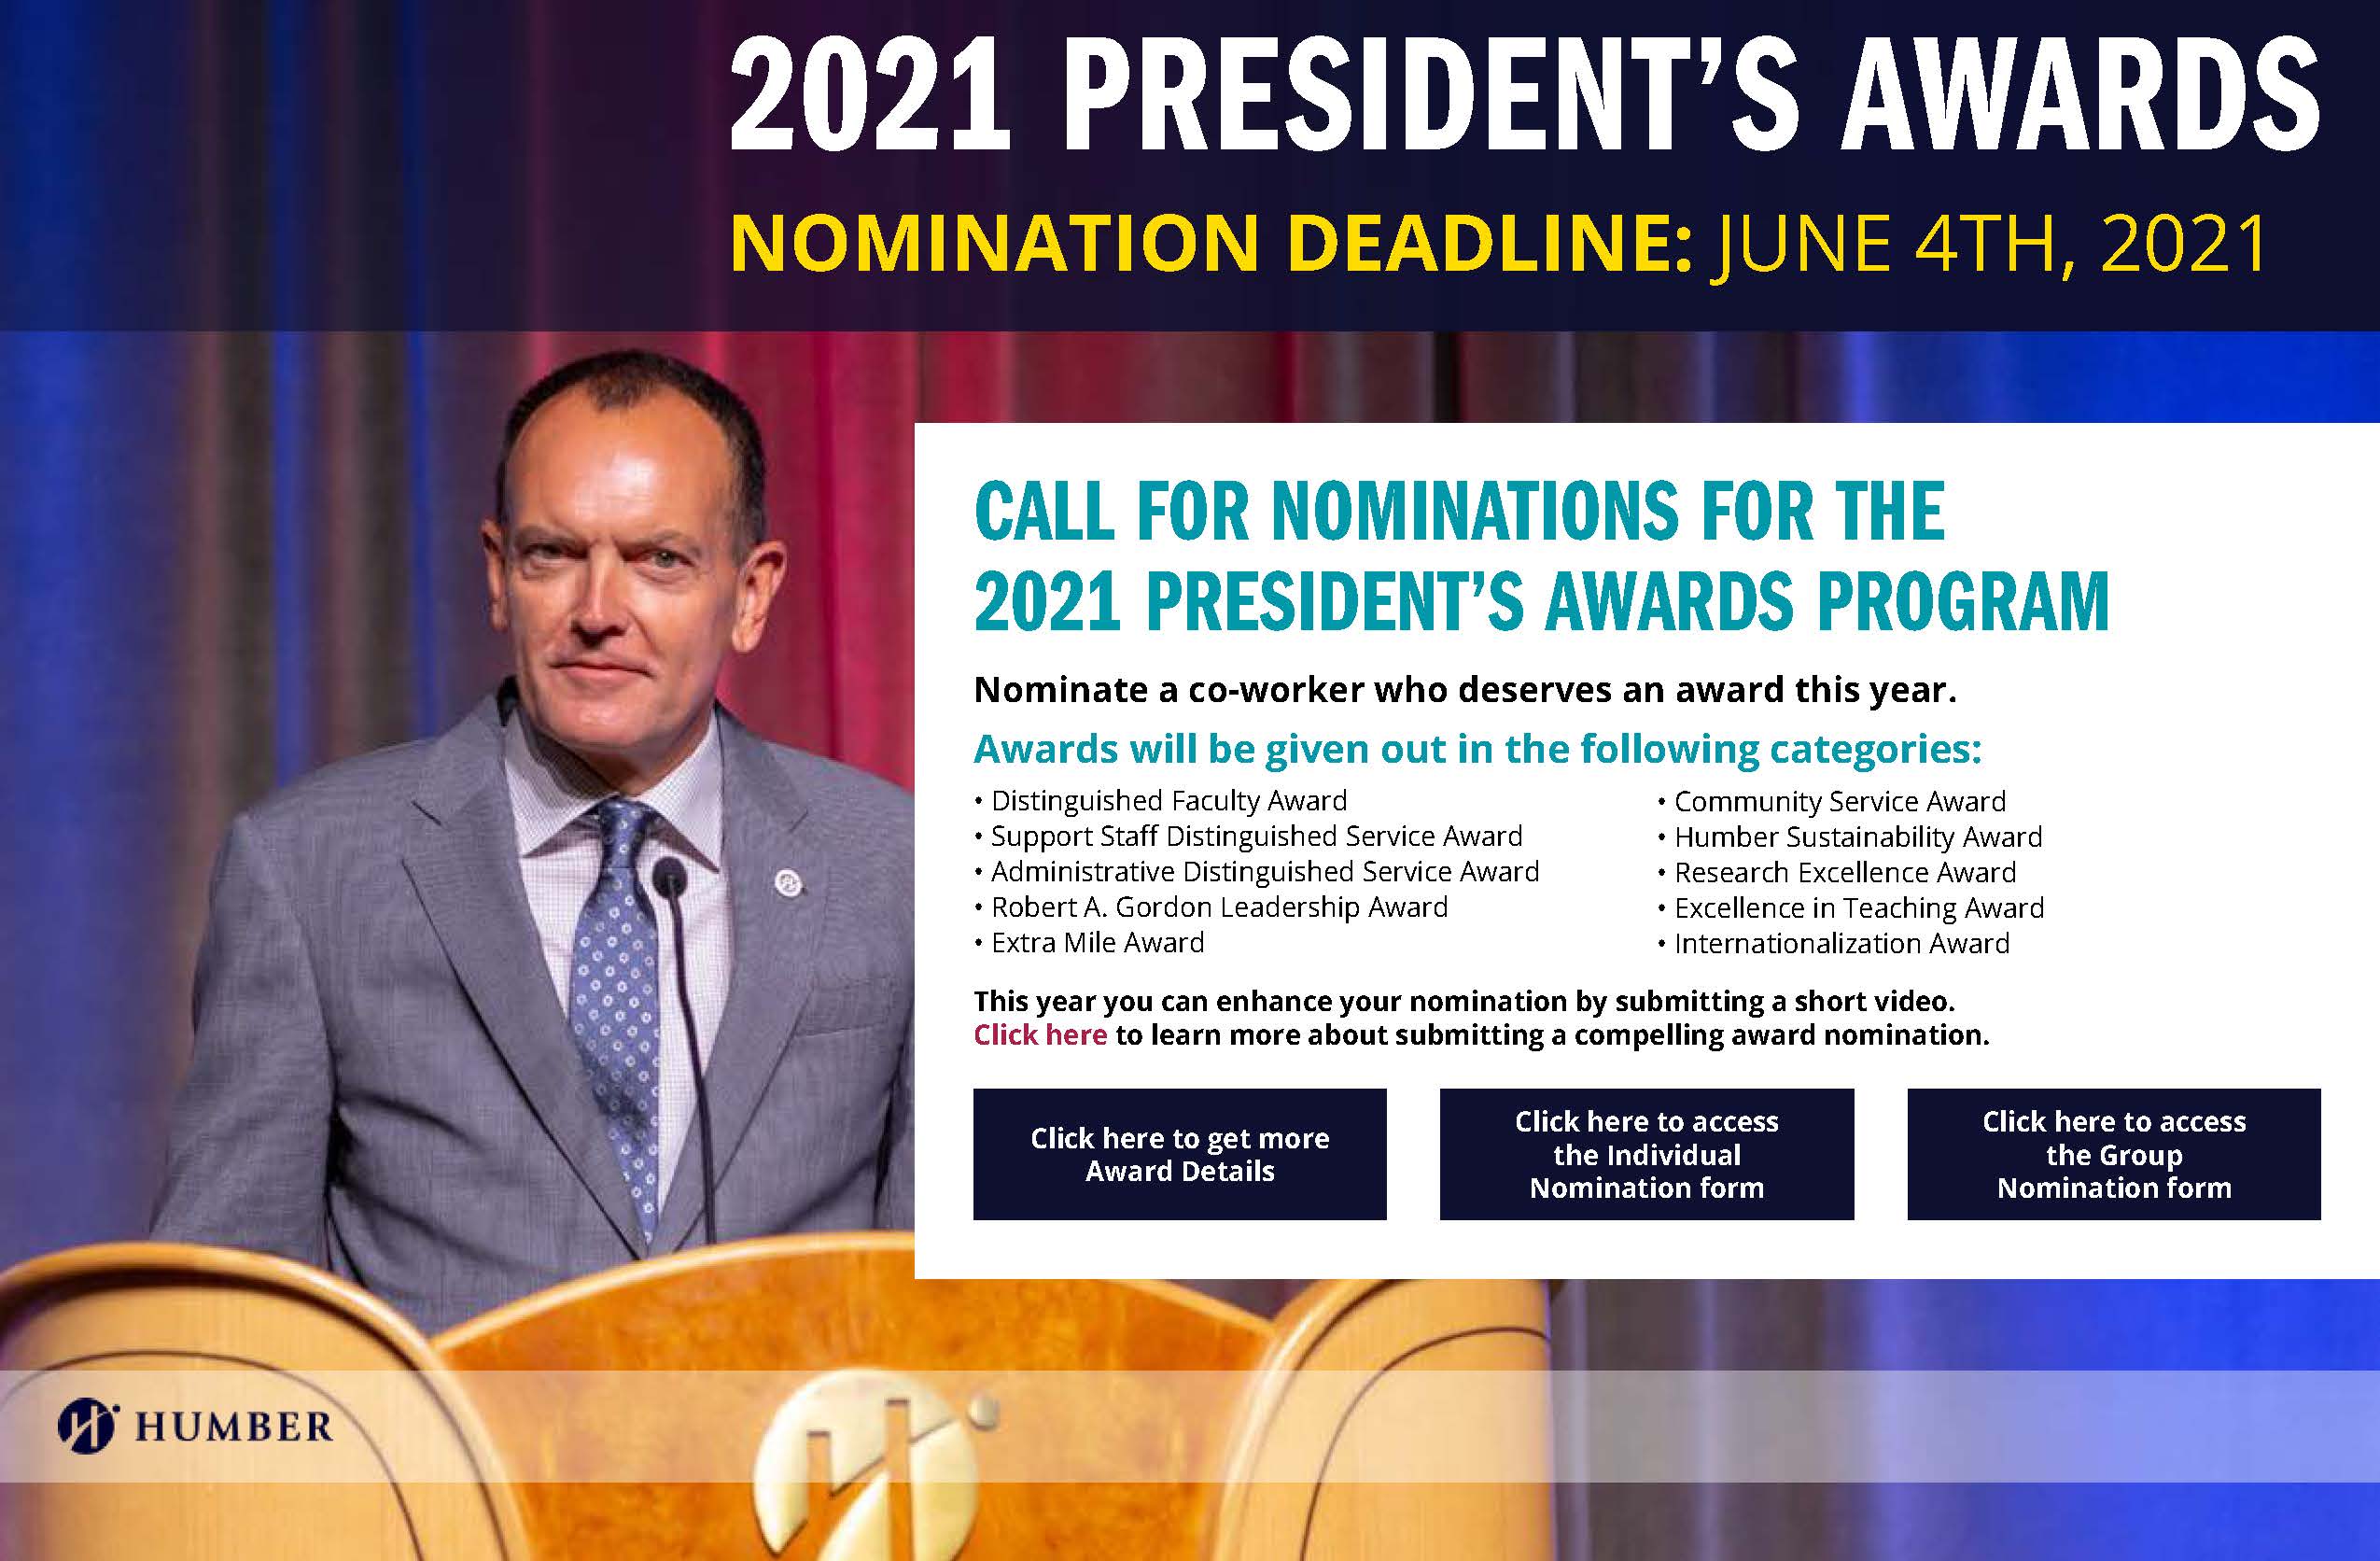 2021 President's Awards Nominate a Colleague Who Deserves to be